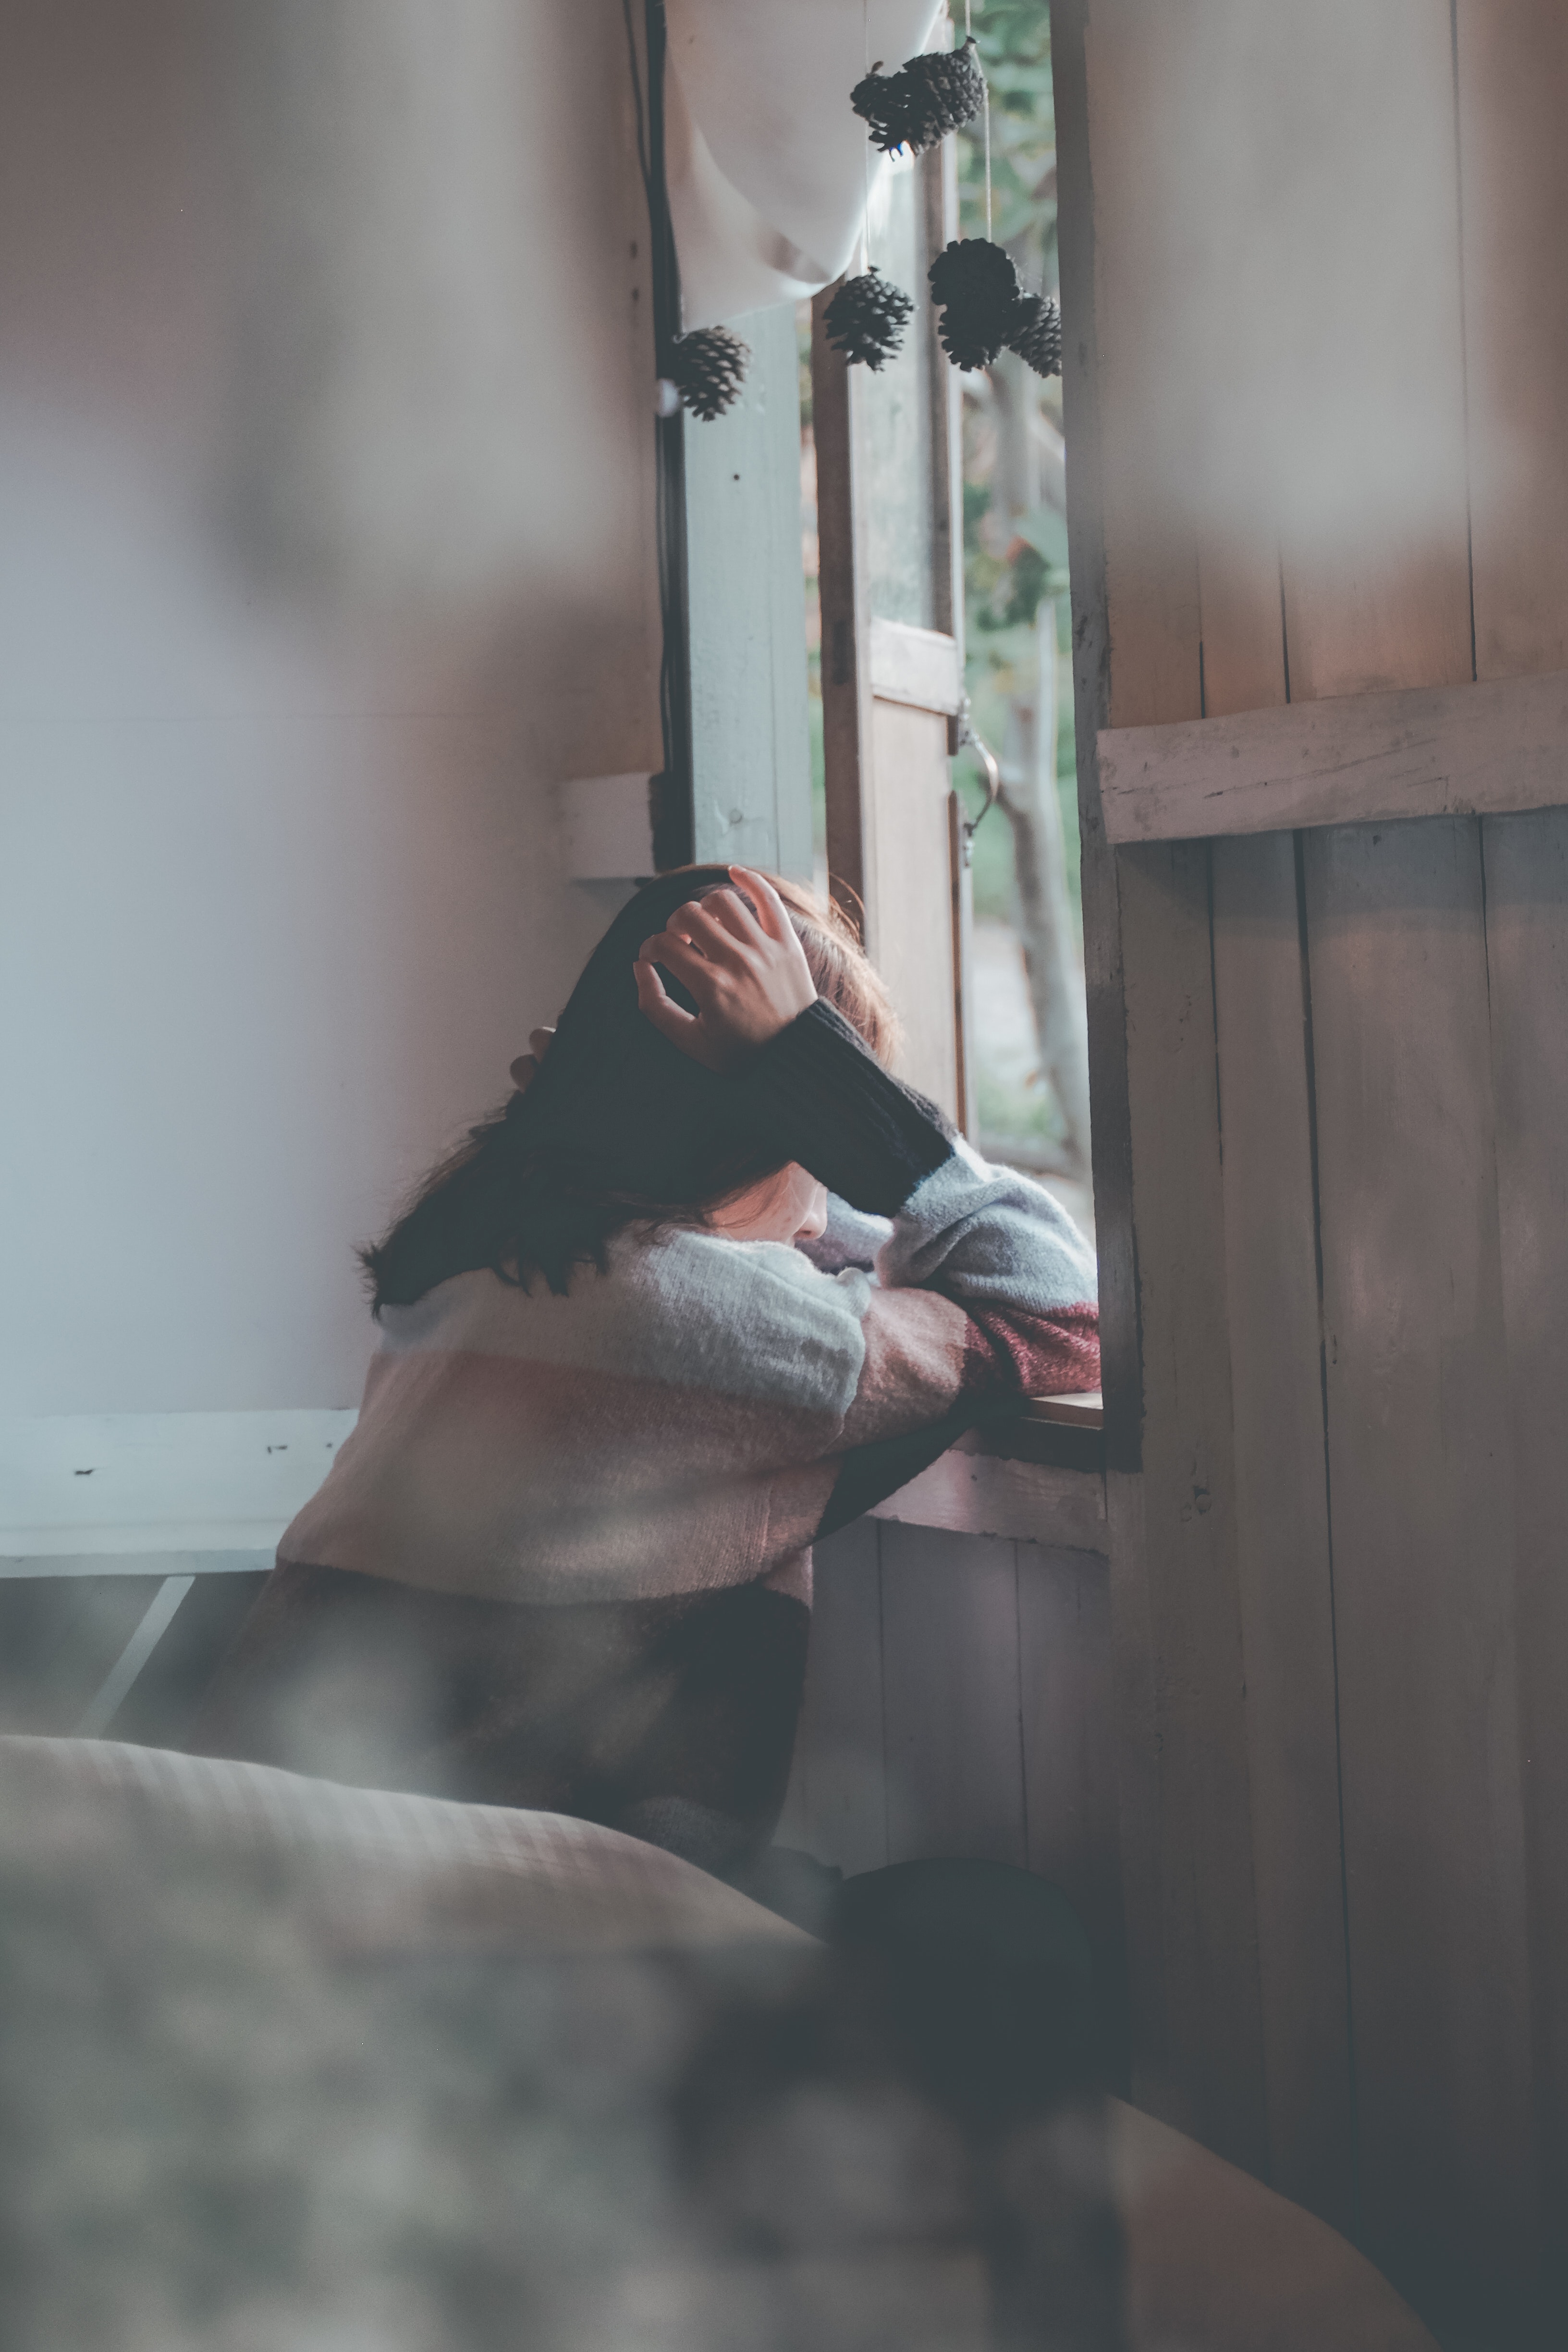 A woman leaning on a window ledge. | Source: Pexels